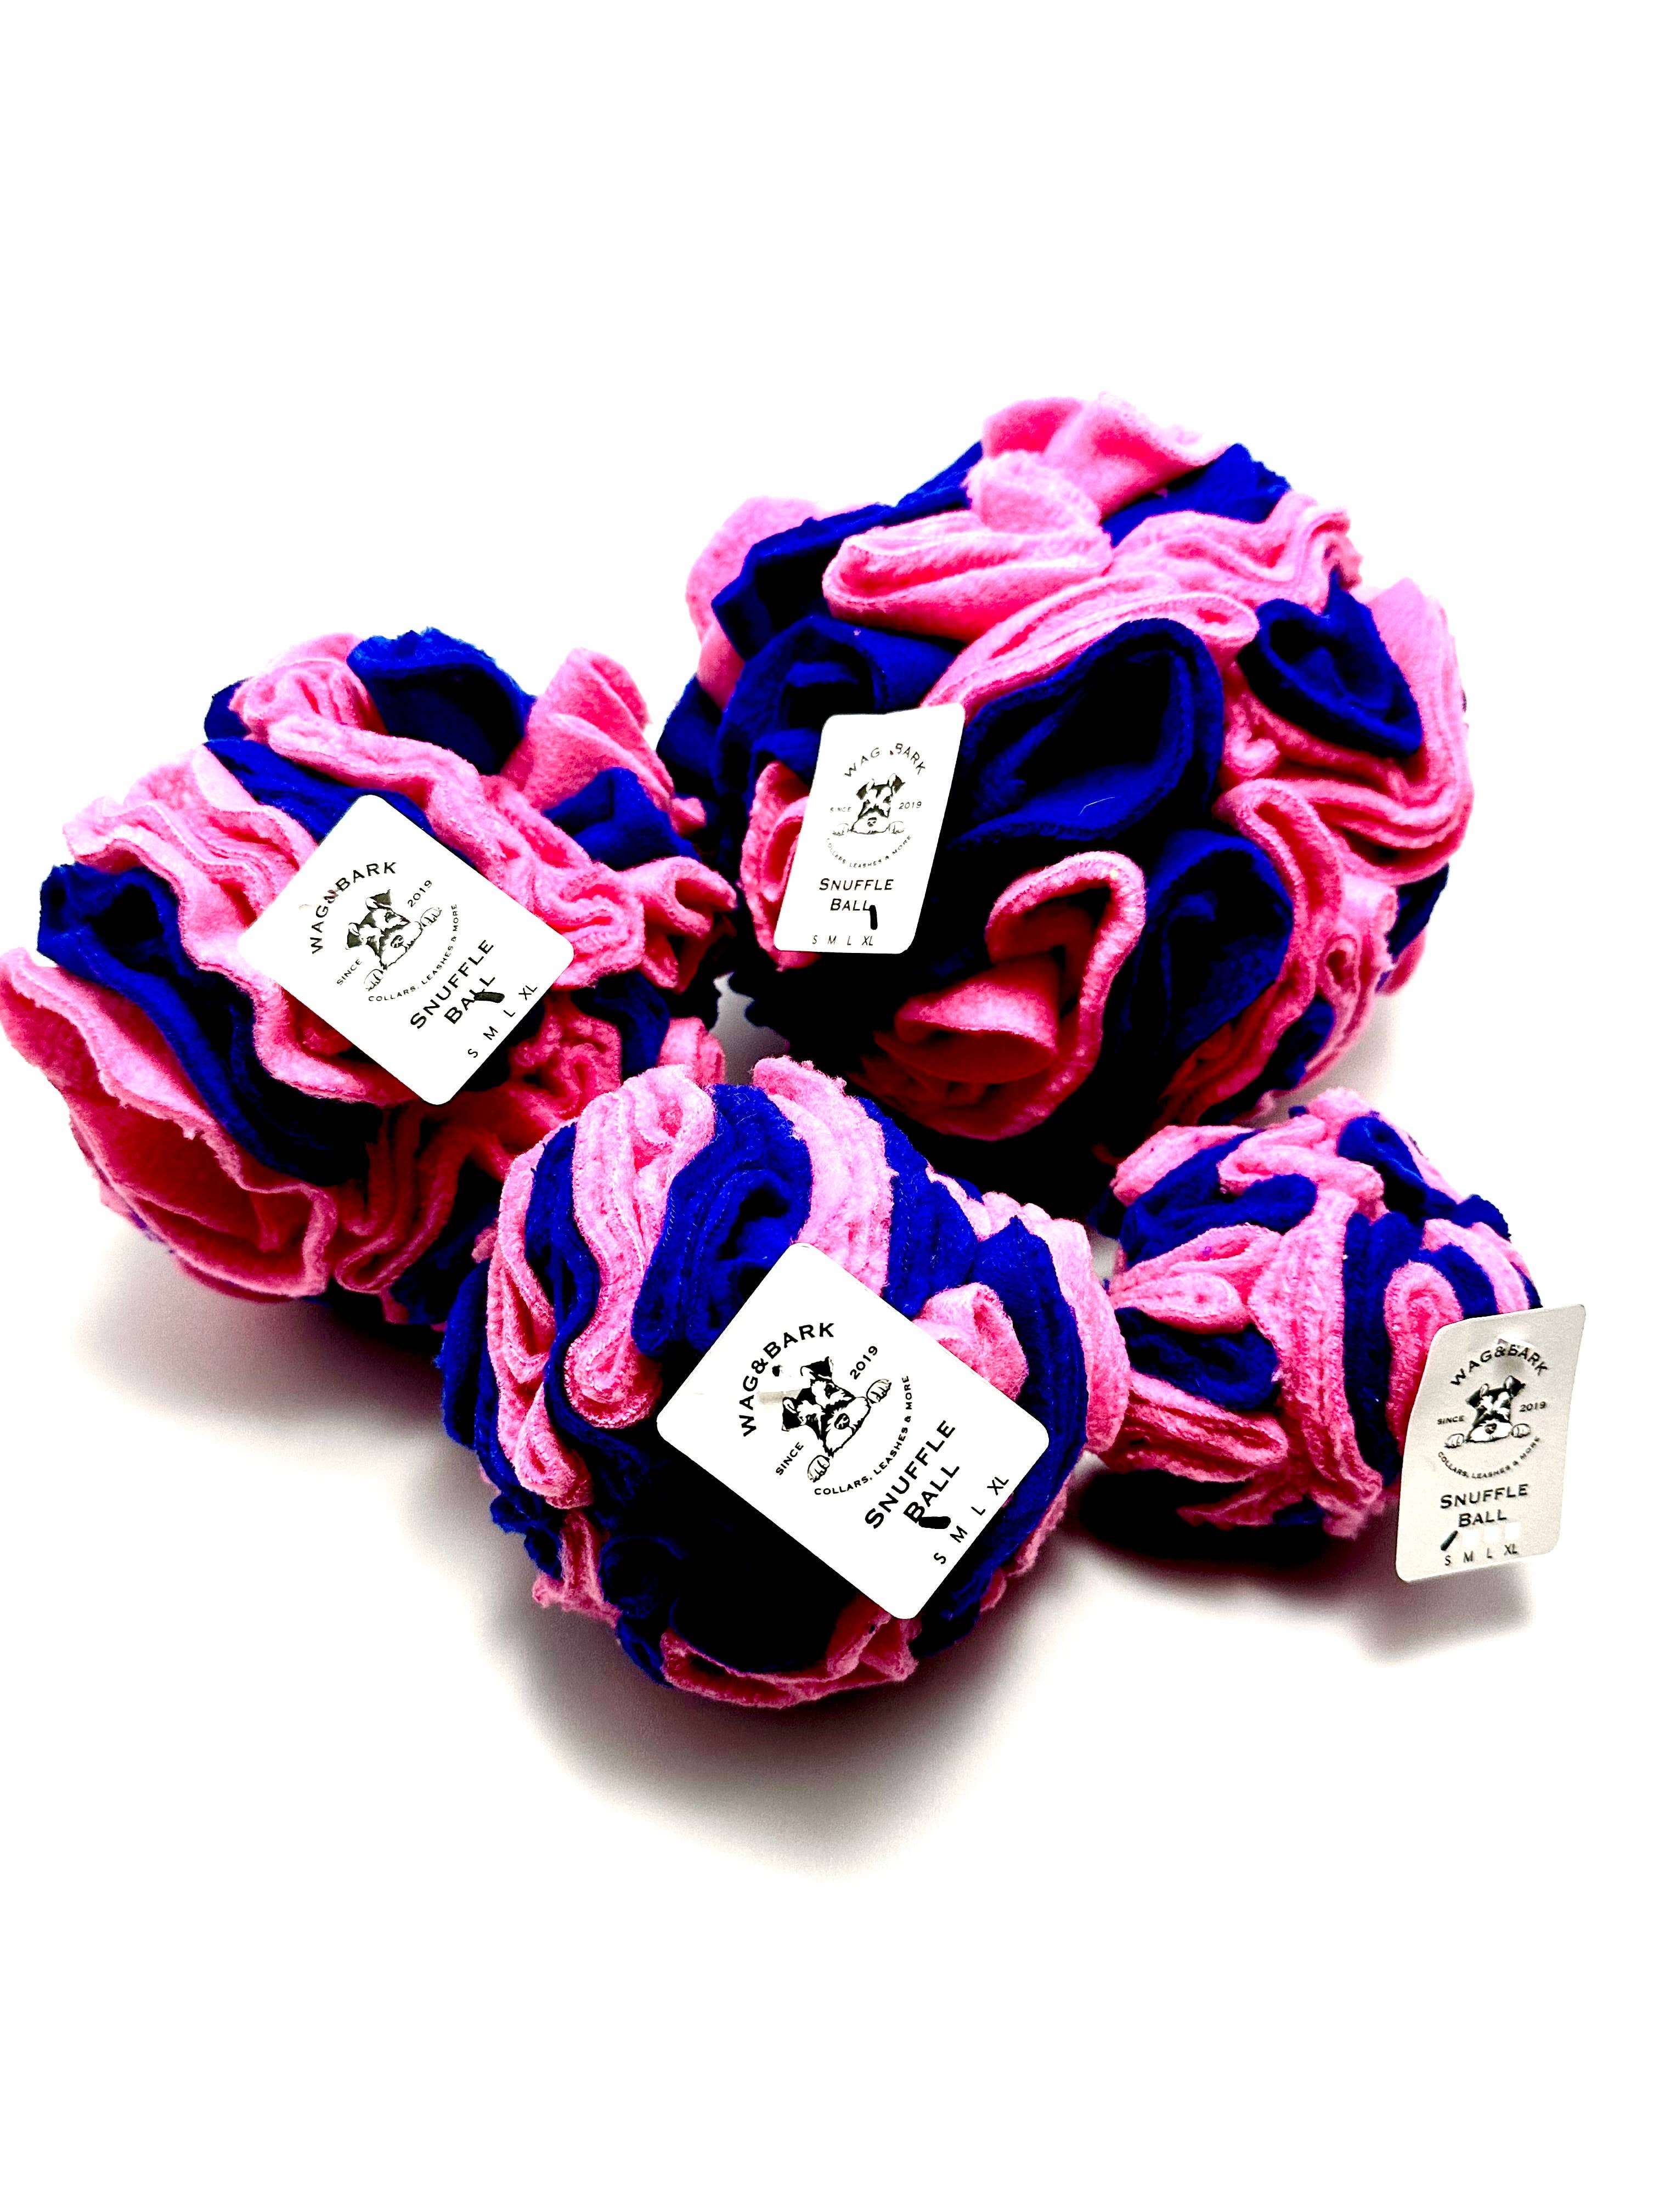 Wag and Bark - Snuffle Ball Brain Toy Royal Blue & Pink: Extra Large